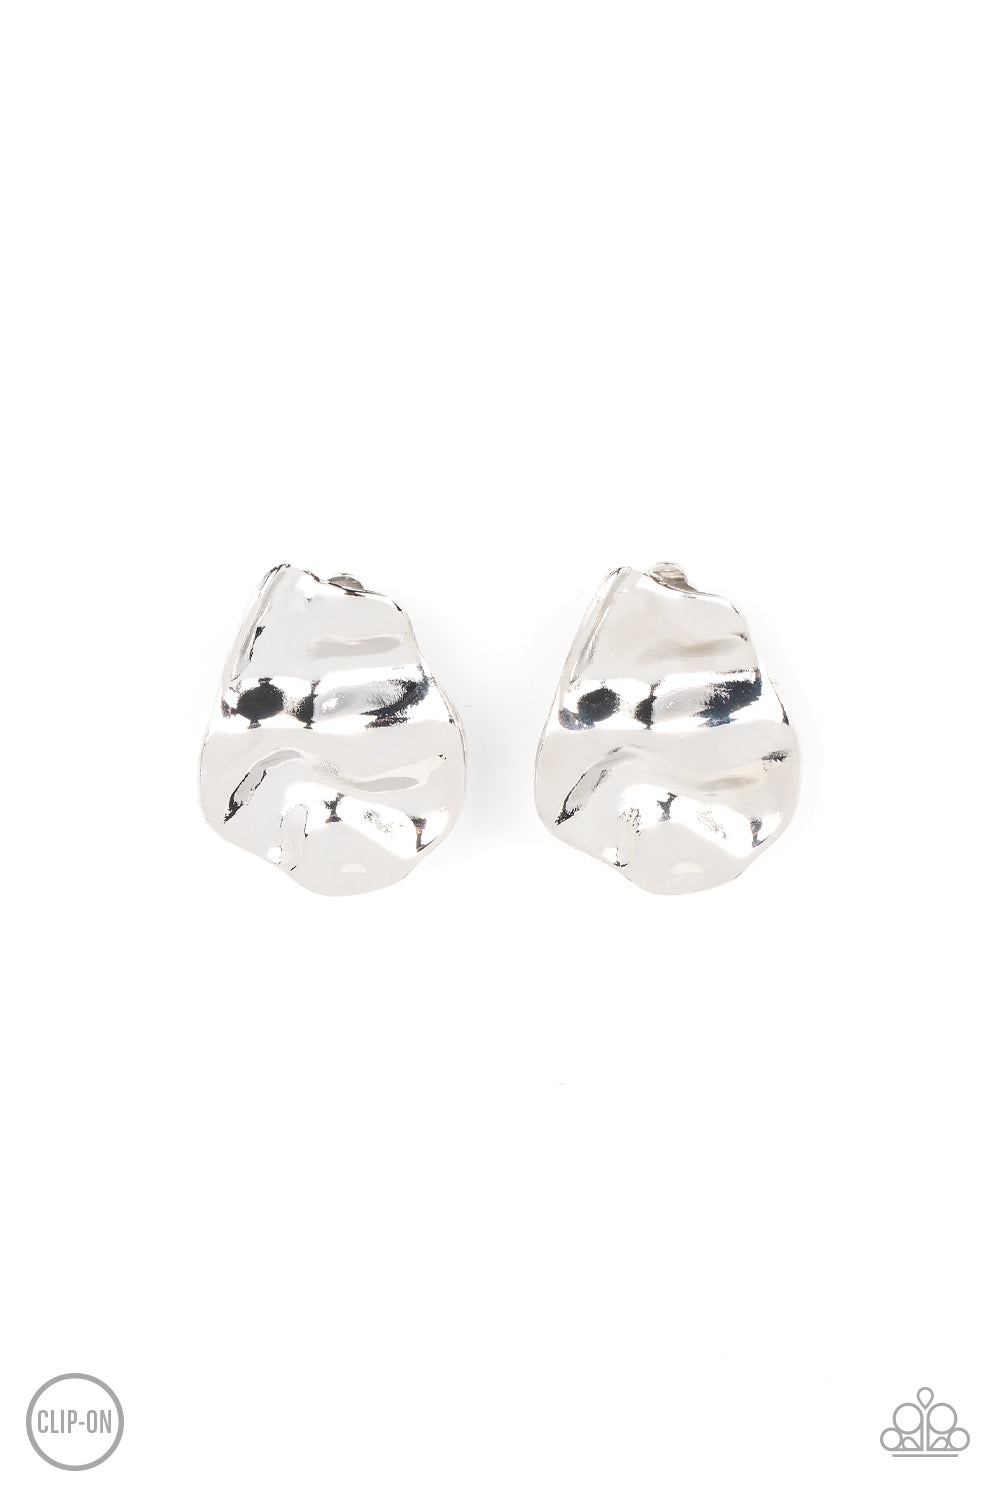 Raise the RUCHE - silver - Paparazzi CLIP ON earrings